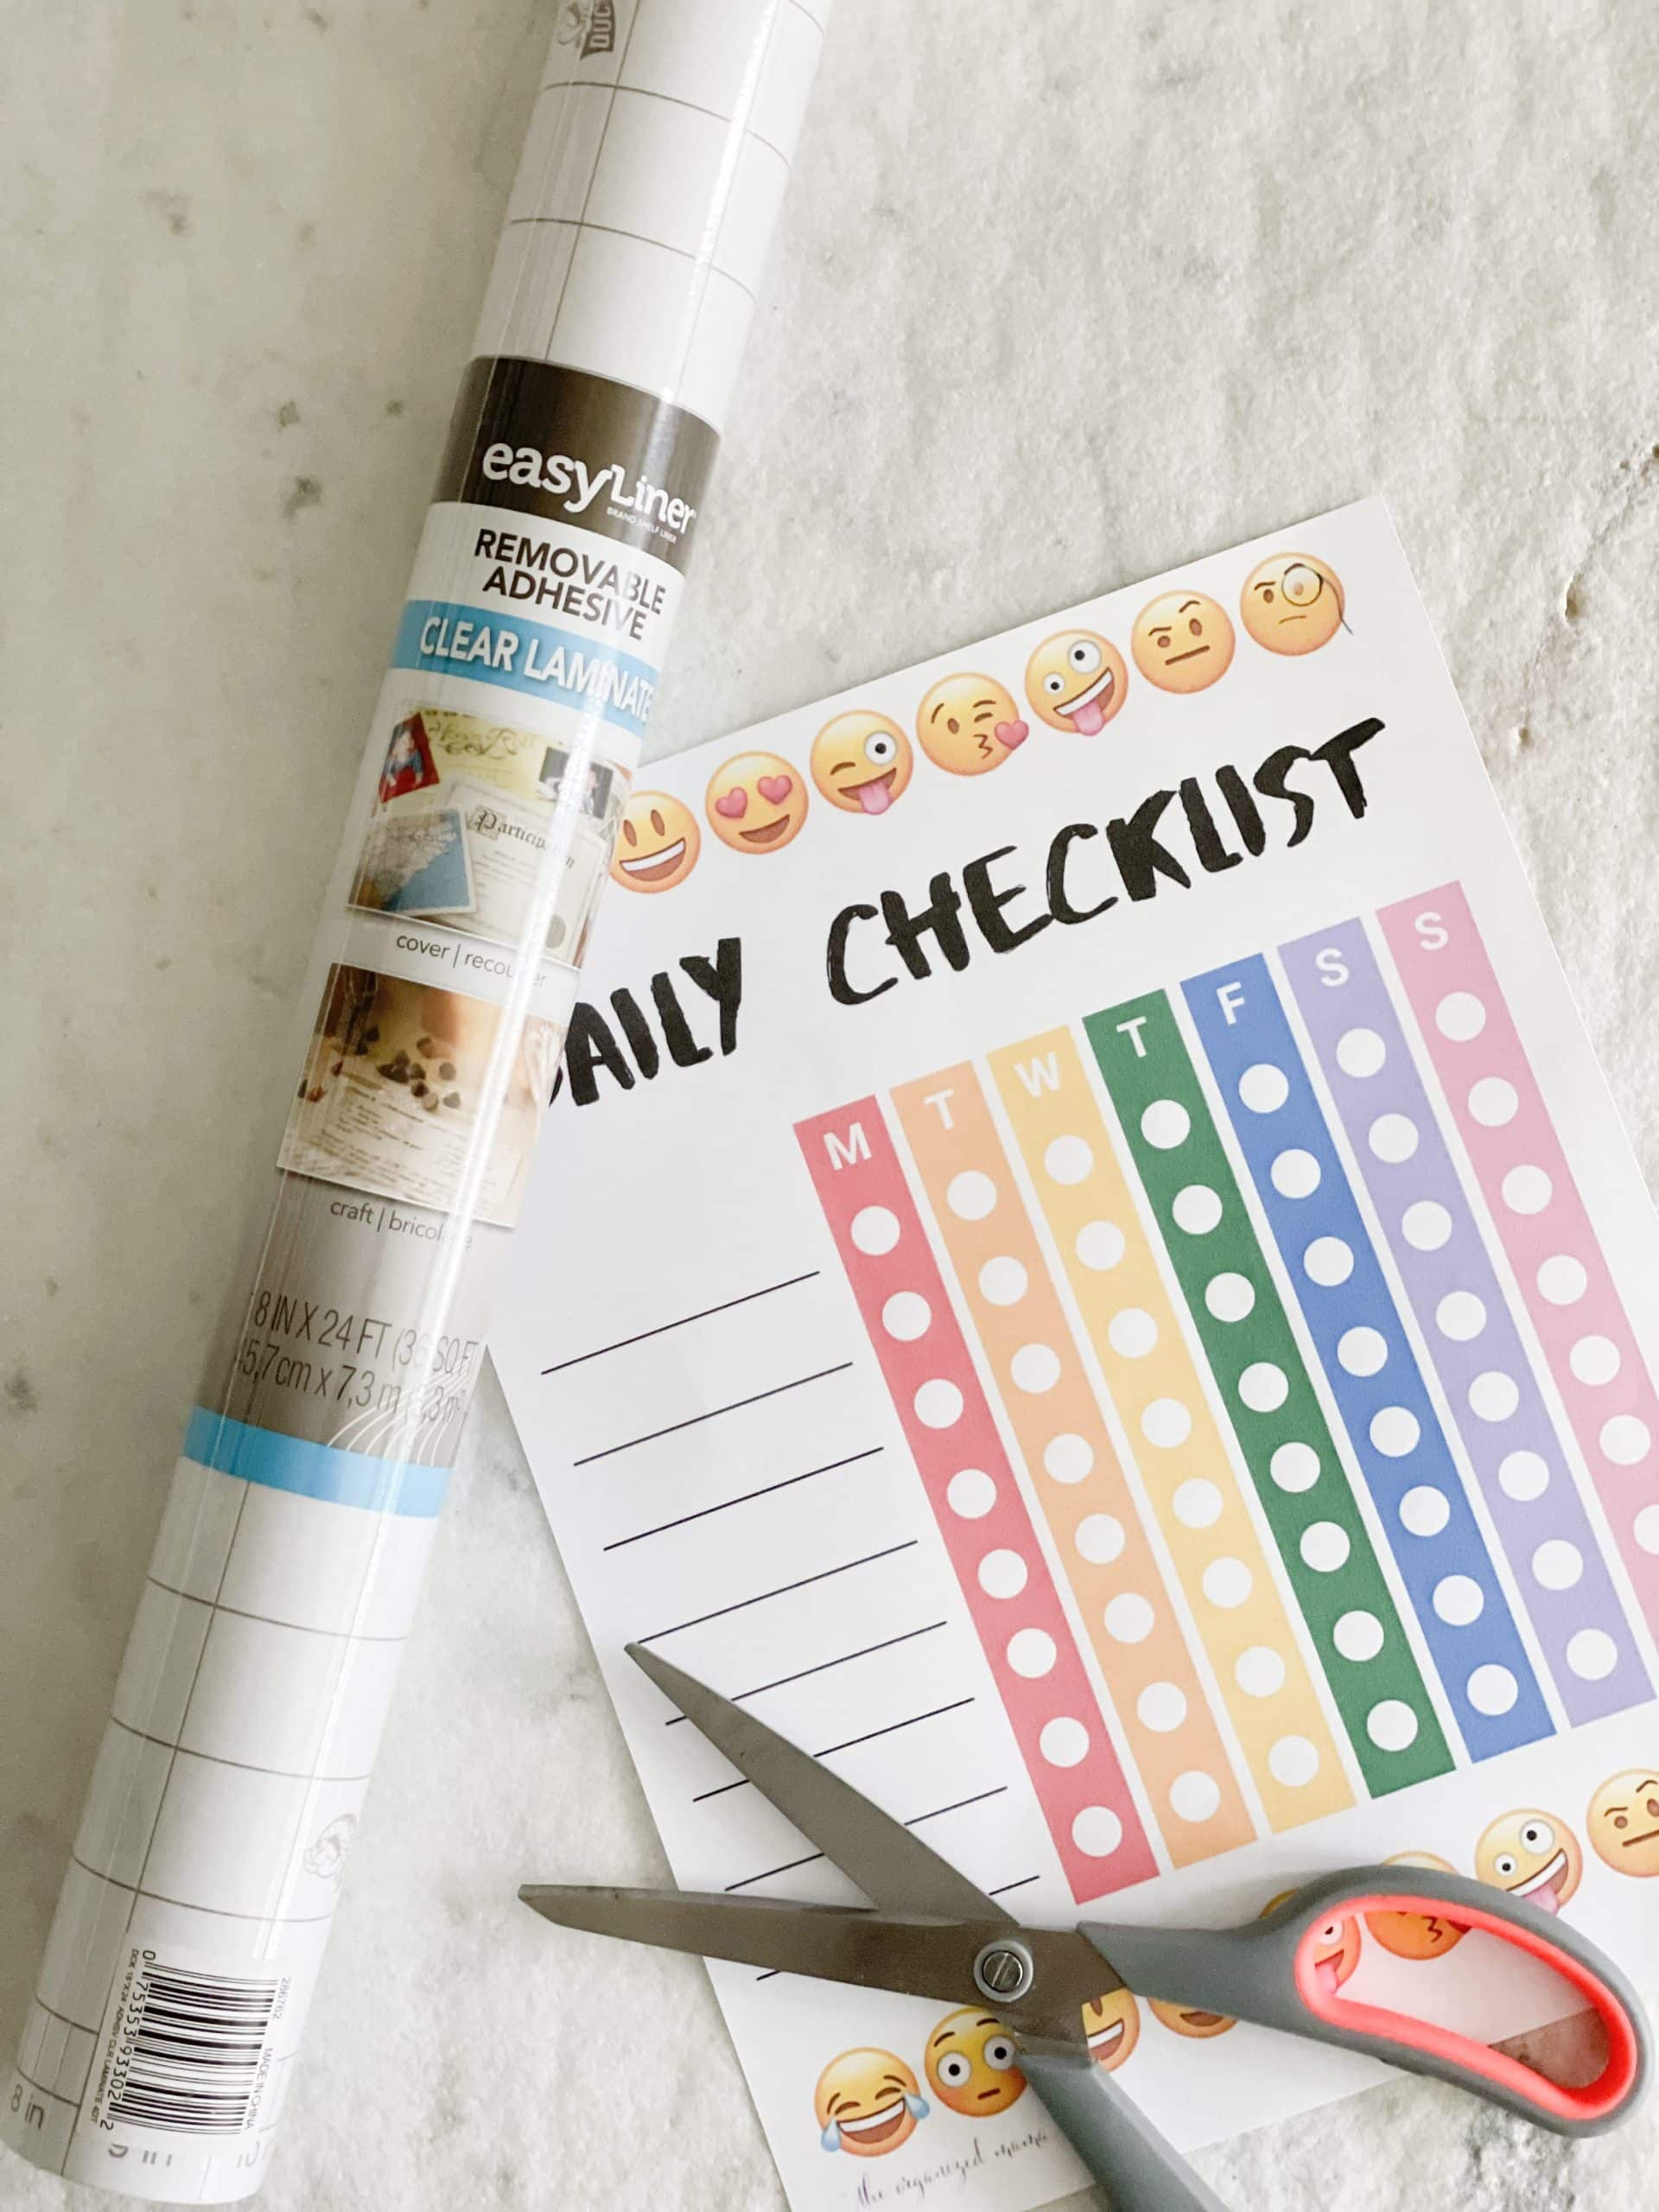 using clear laminate to laminate checklists for kids